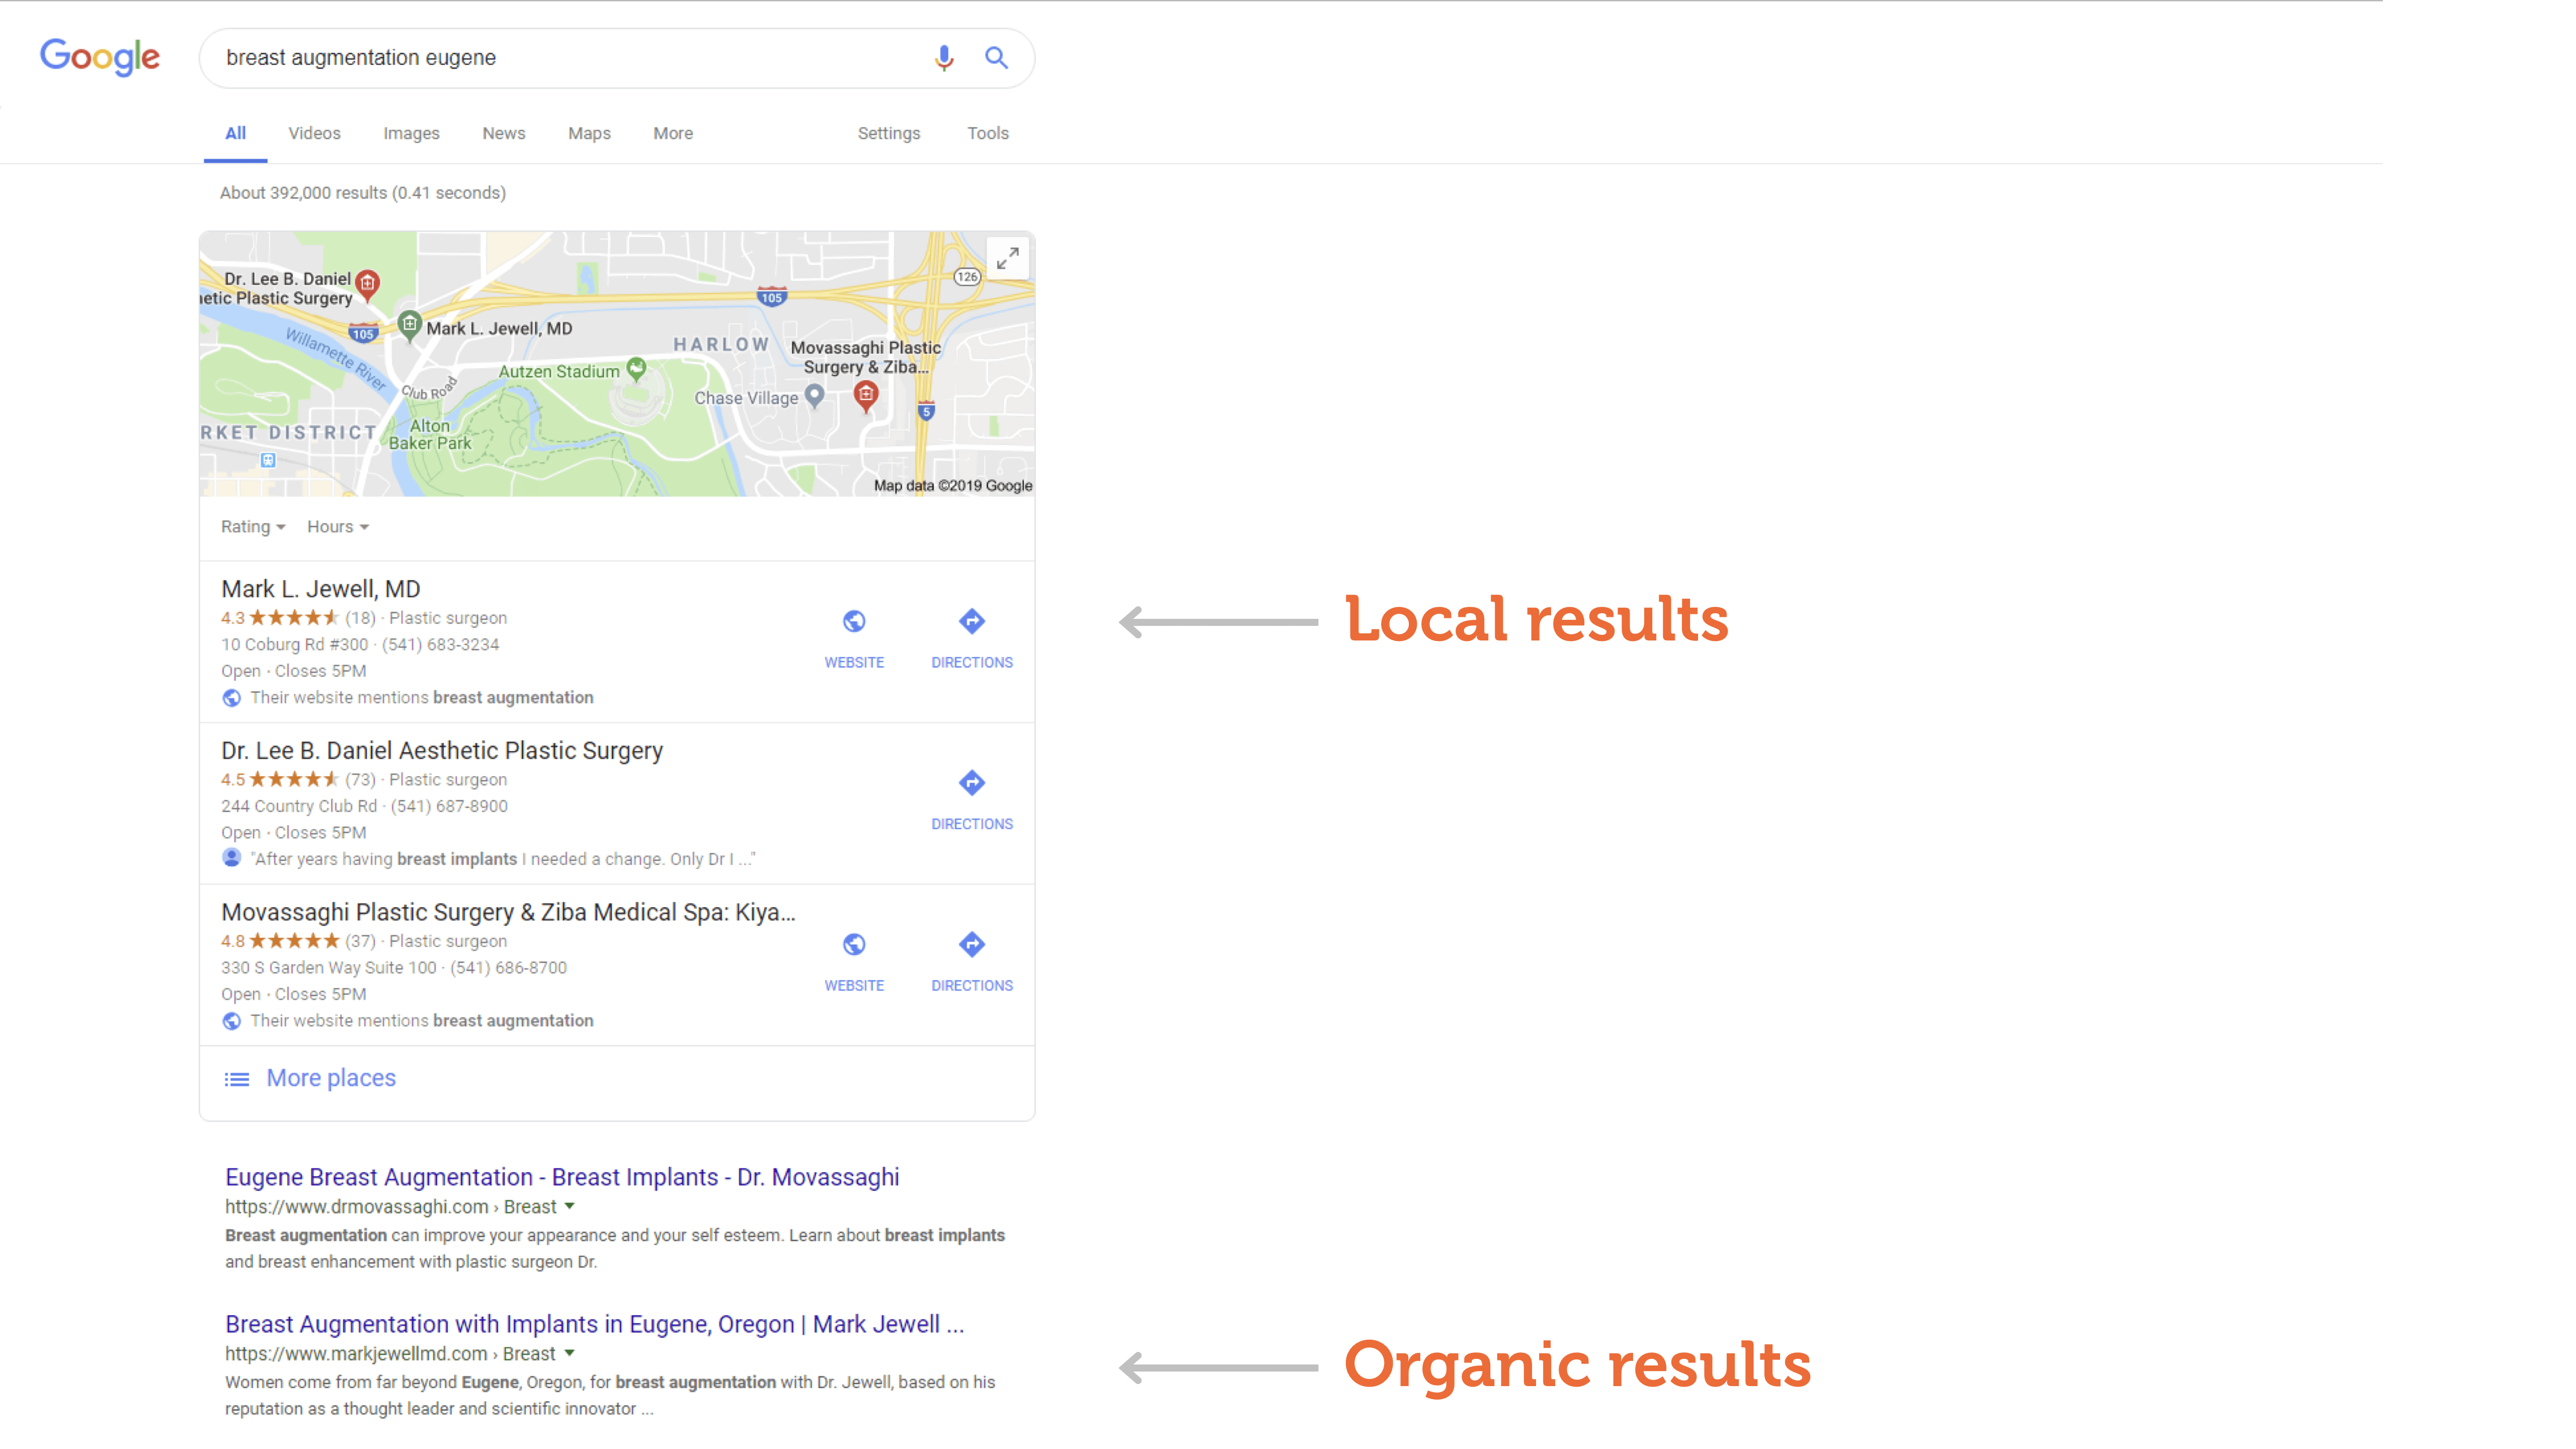 Measuring your practice's local and organic search results in Google.